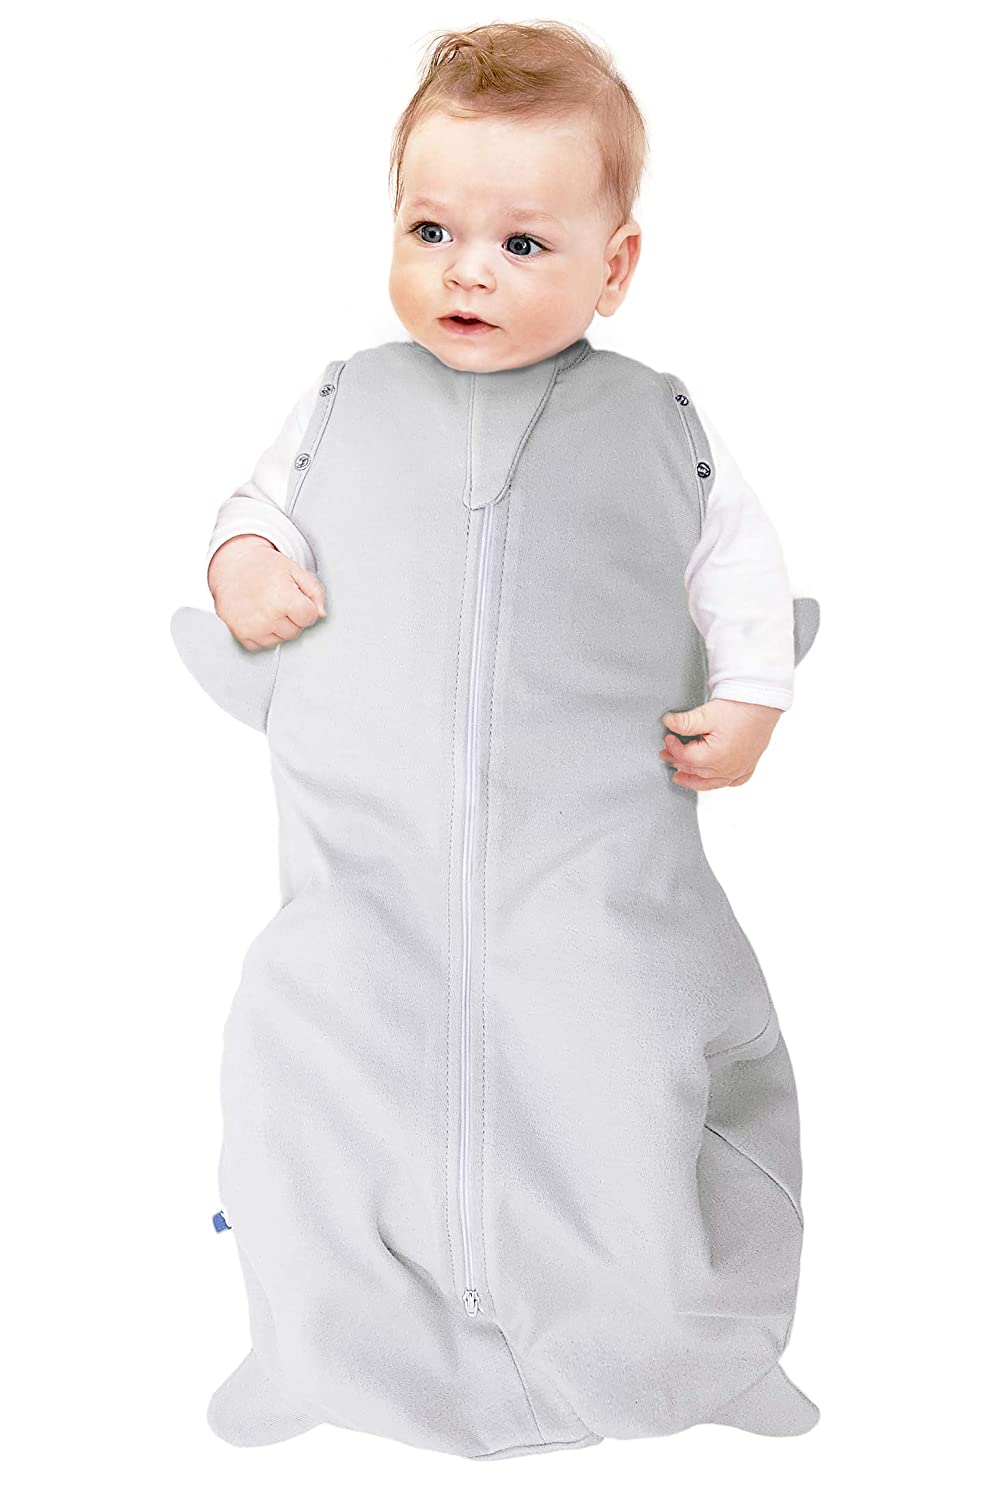 Wallaboo Baby sleeping bag, the ideal first pack bag for your little ones, 100% cotton, great for babies who often wake up, also suitable for all baby seats, dimensions S: 0-3 months, 3-6 kg, colour: silver